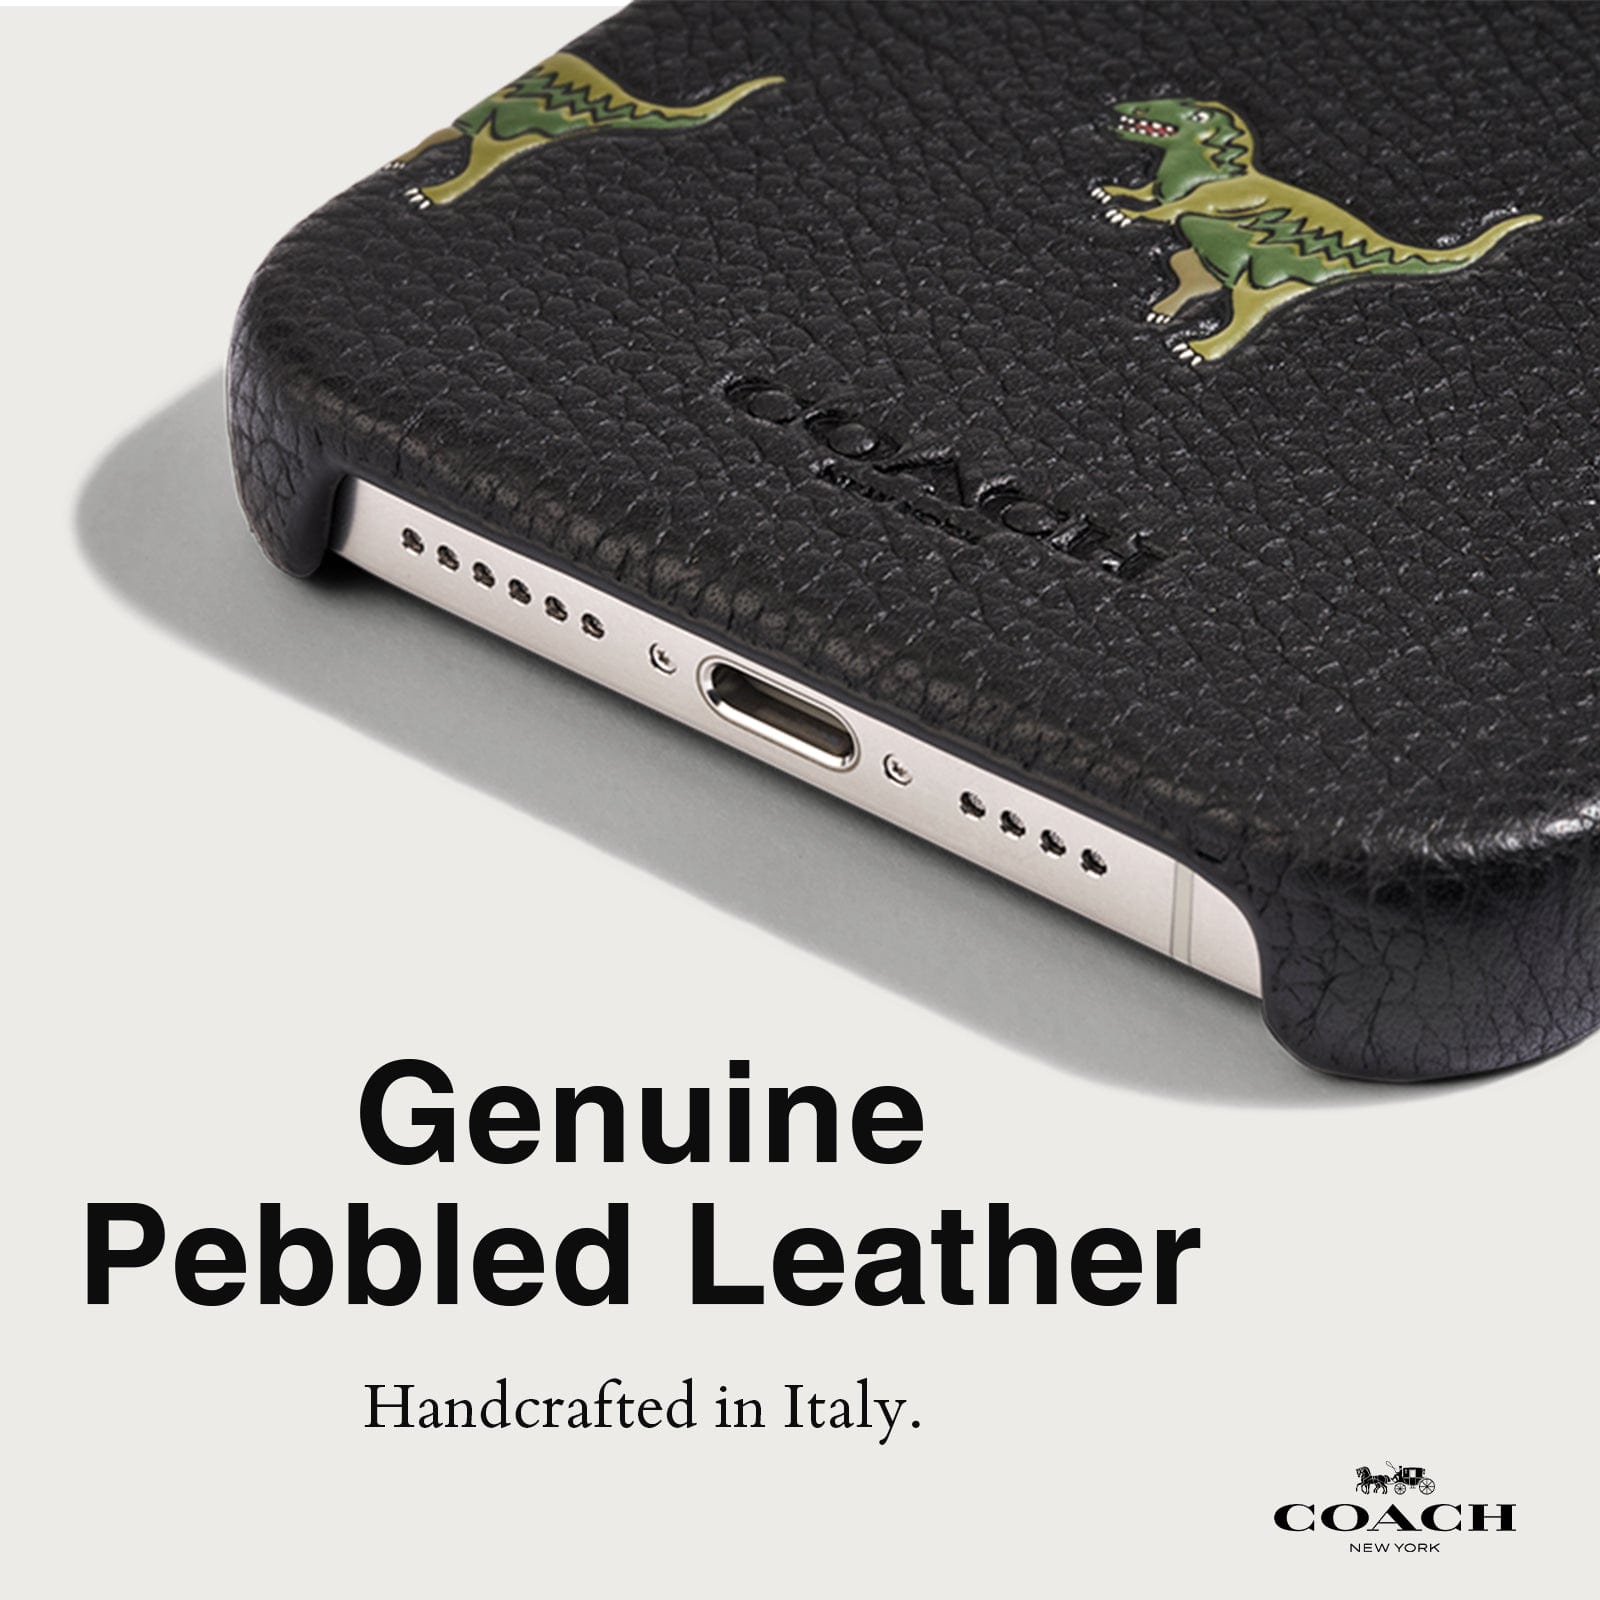 GENUINE PEBBLED LEATHER. HANDCRAFTED IN ITALY. 